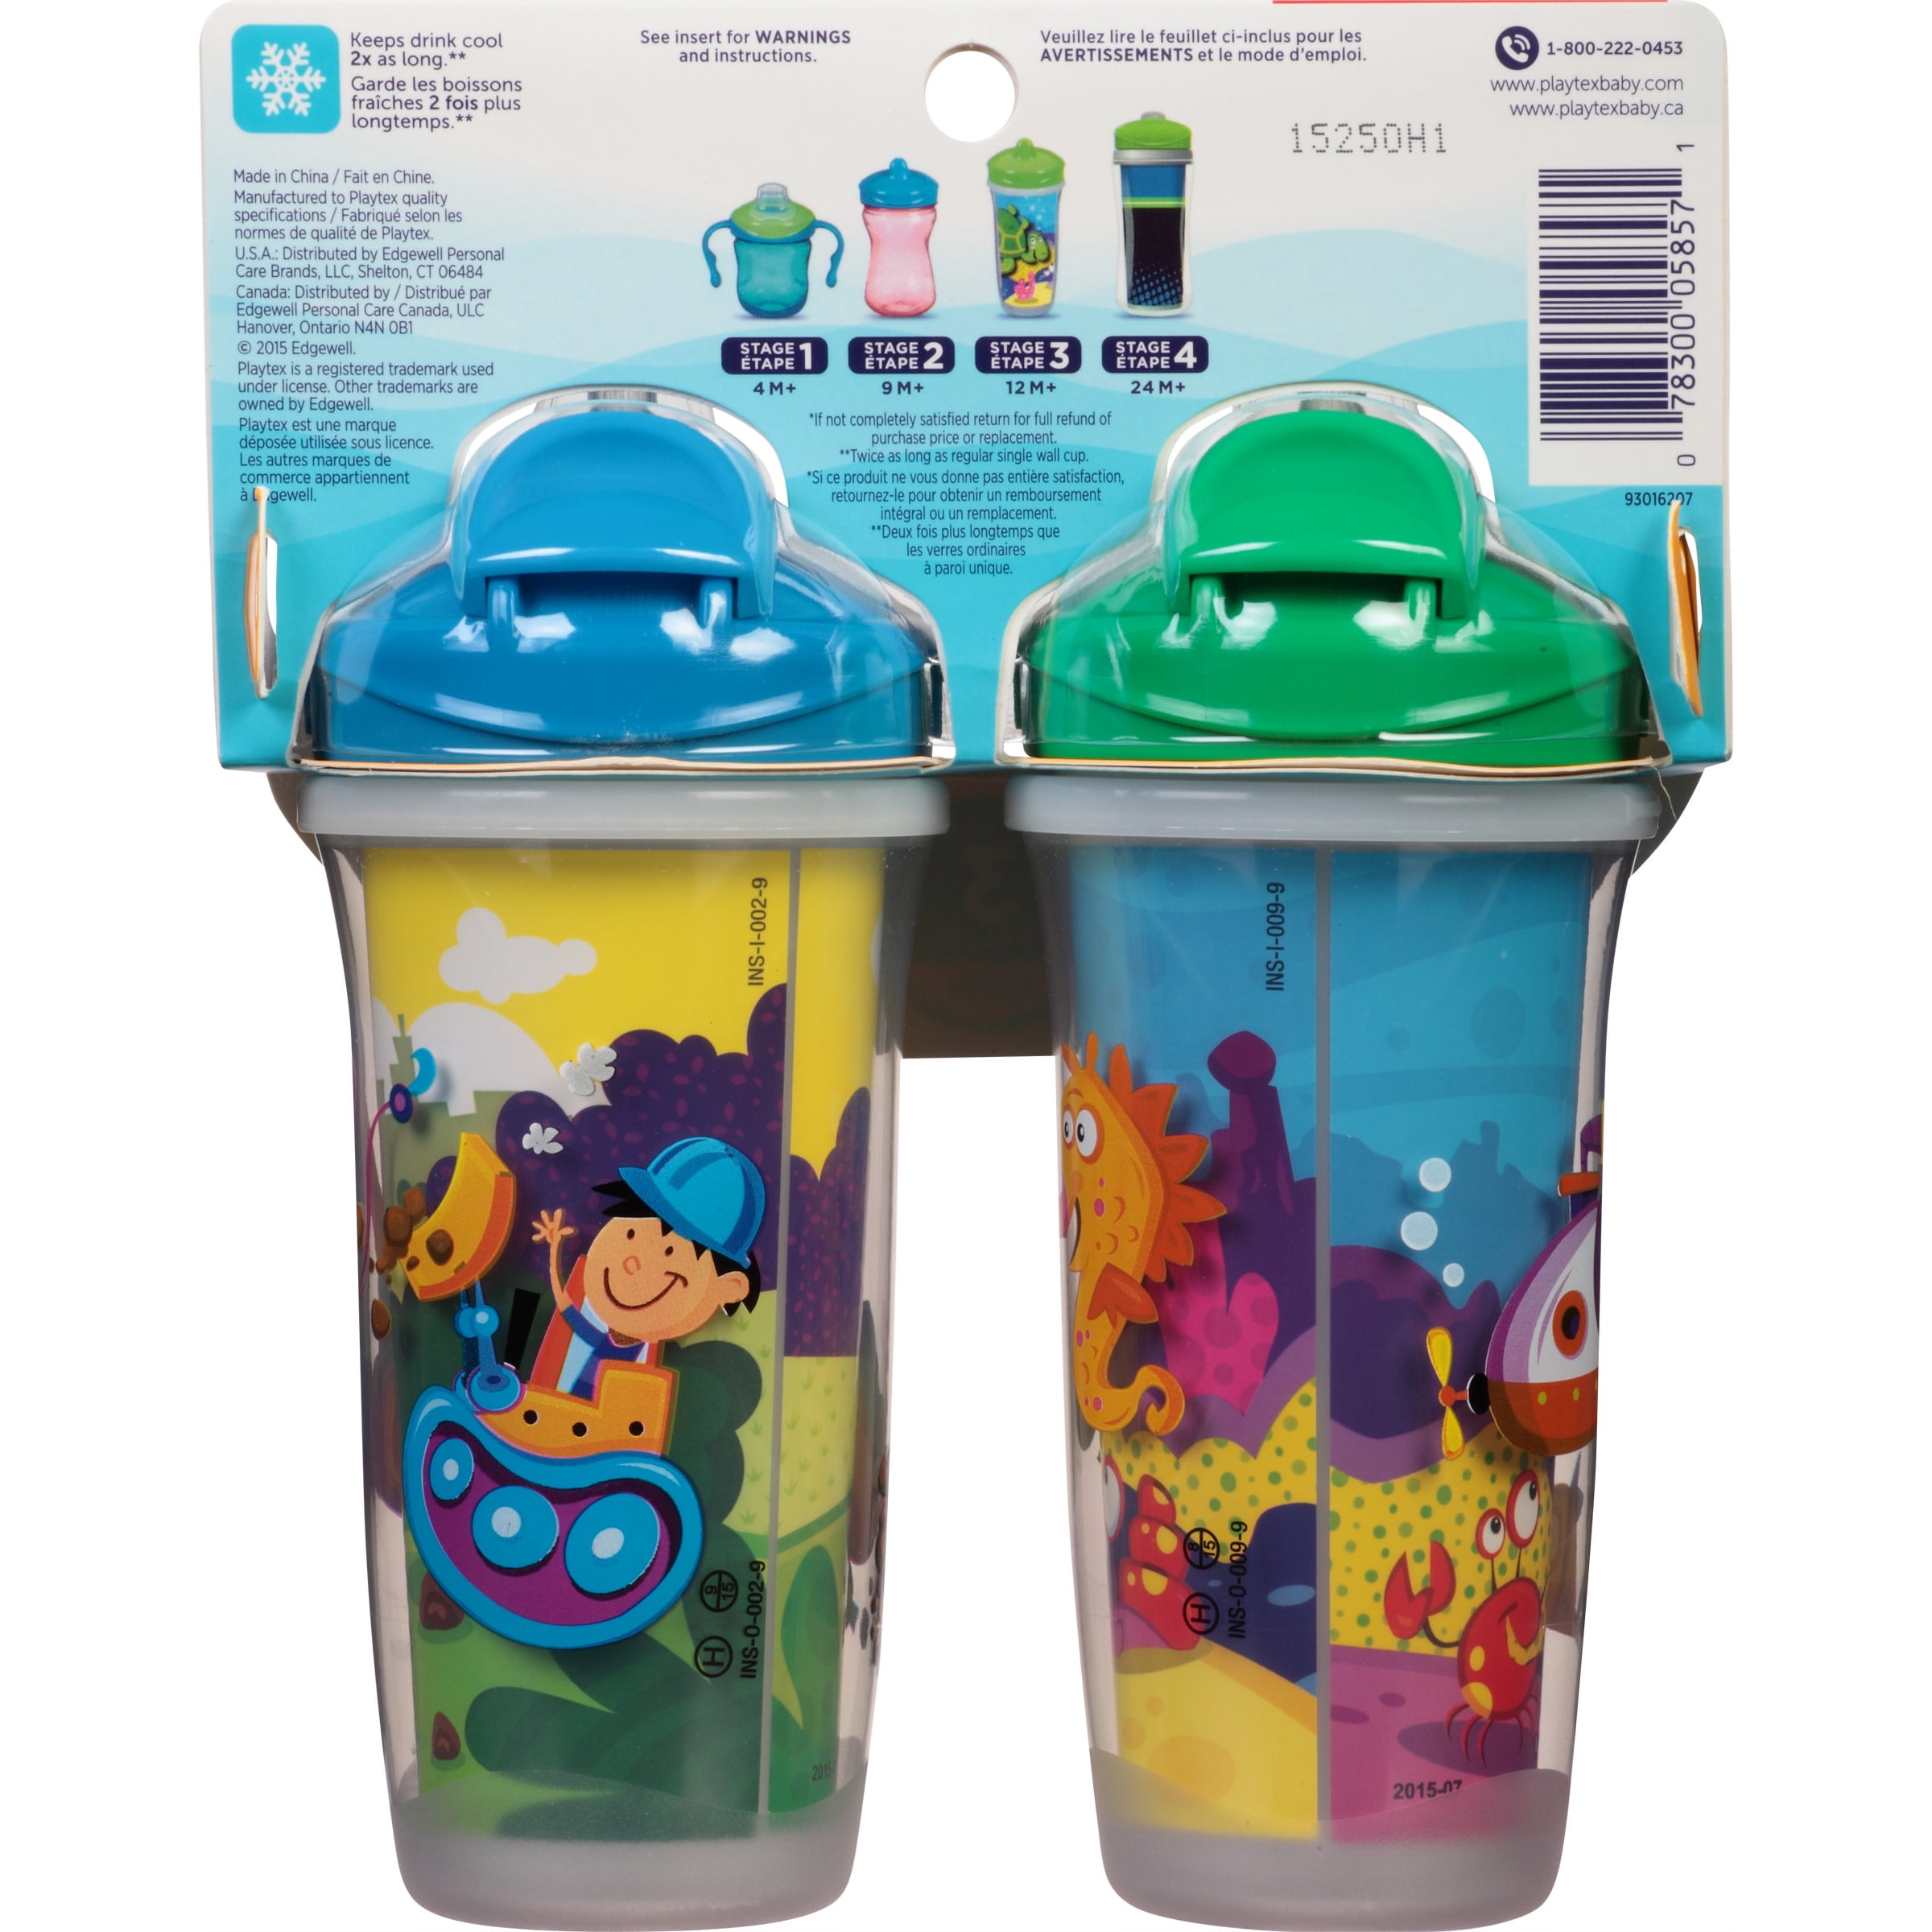 Playtex® Stage 2 Straw Cup - 2 Pack - Blue and Green – PlaytexBaby